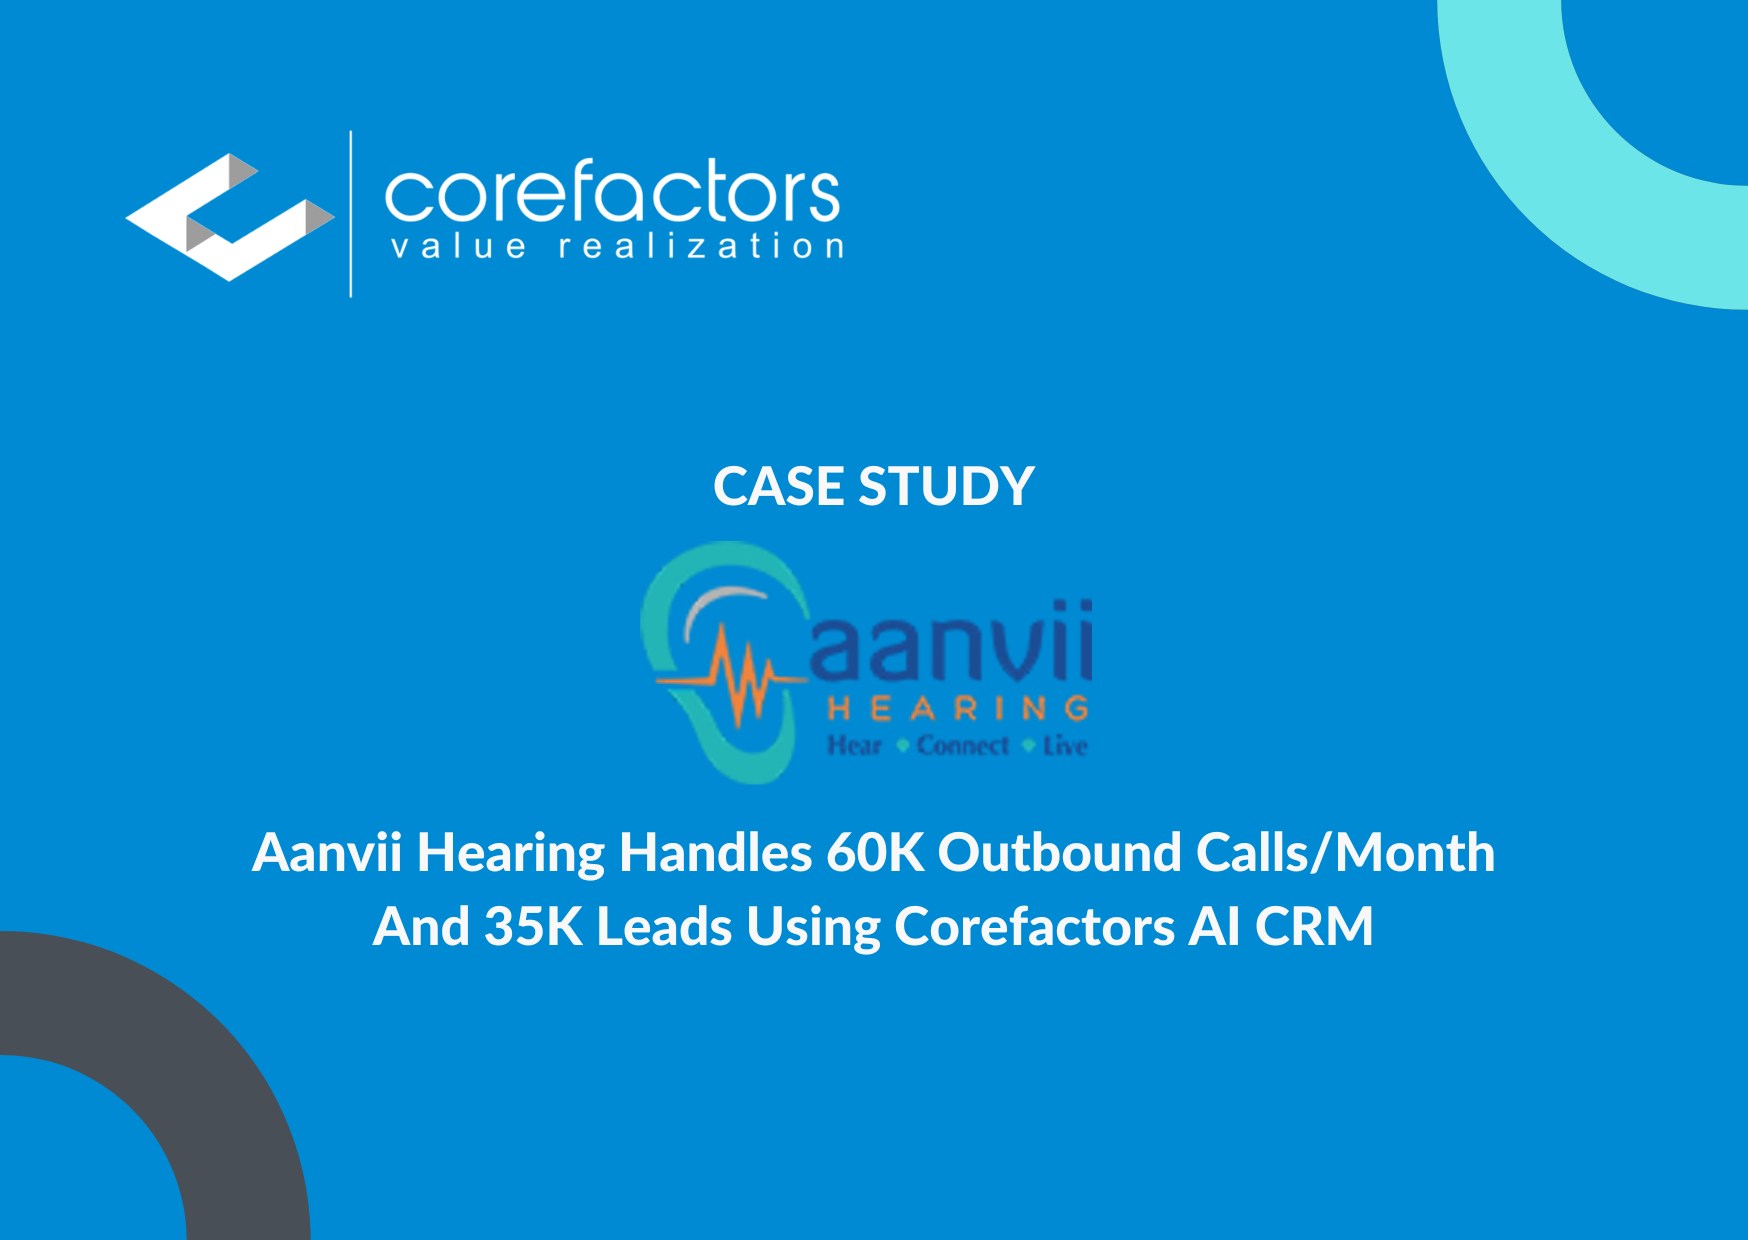 Aanvii Hearing handles 60K outbound calls/month and 35K leads using Corefactors AI CRM